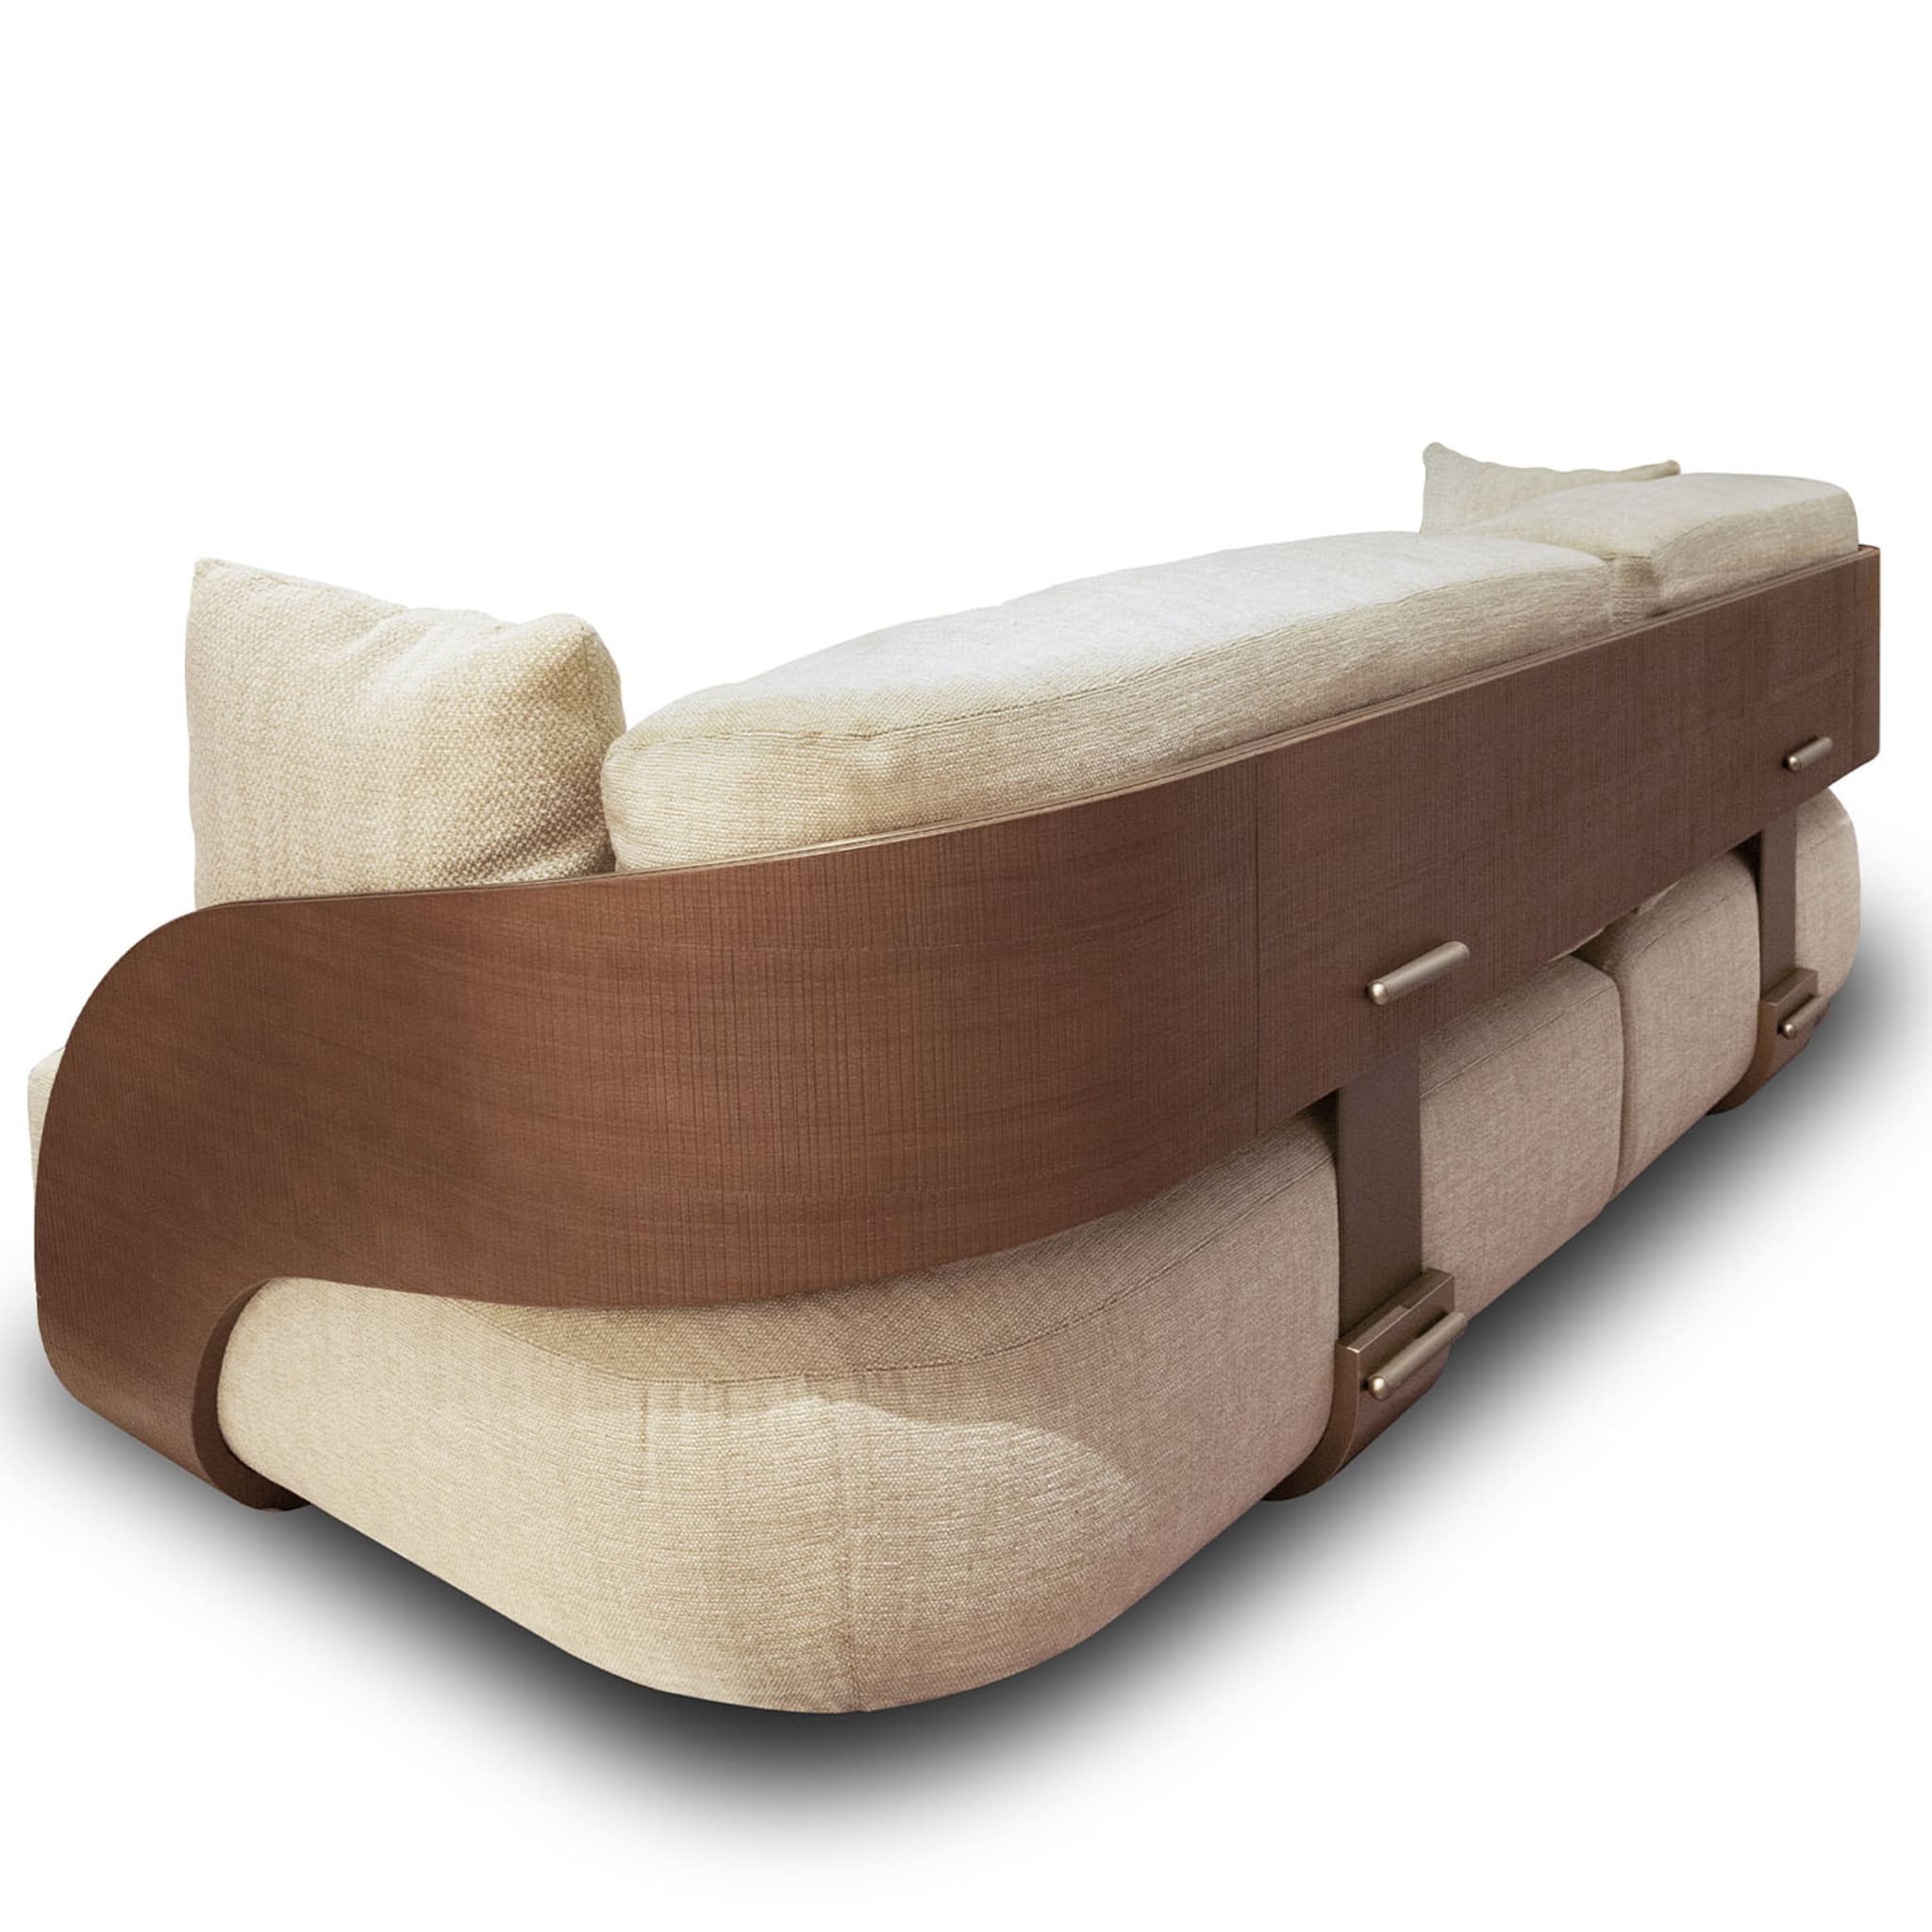 LeLude Collection Sofa - Alternative view 2